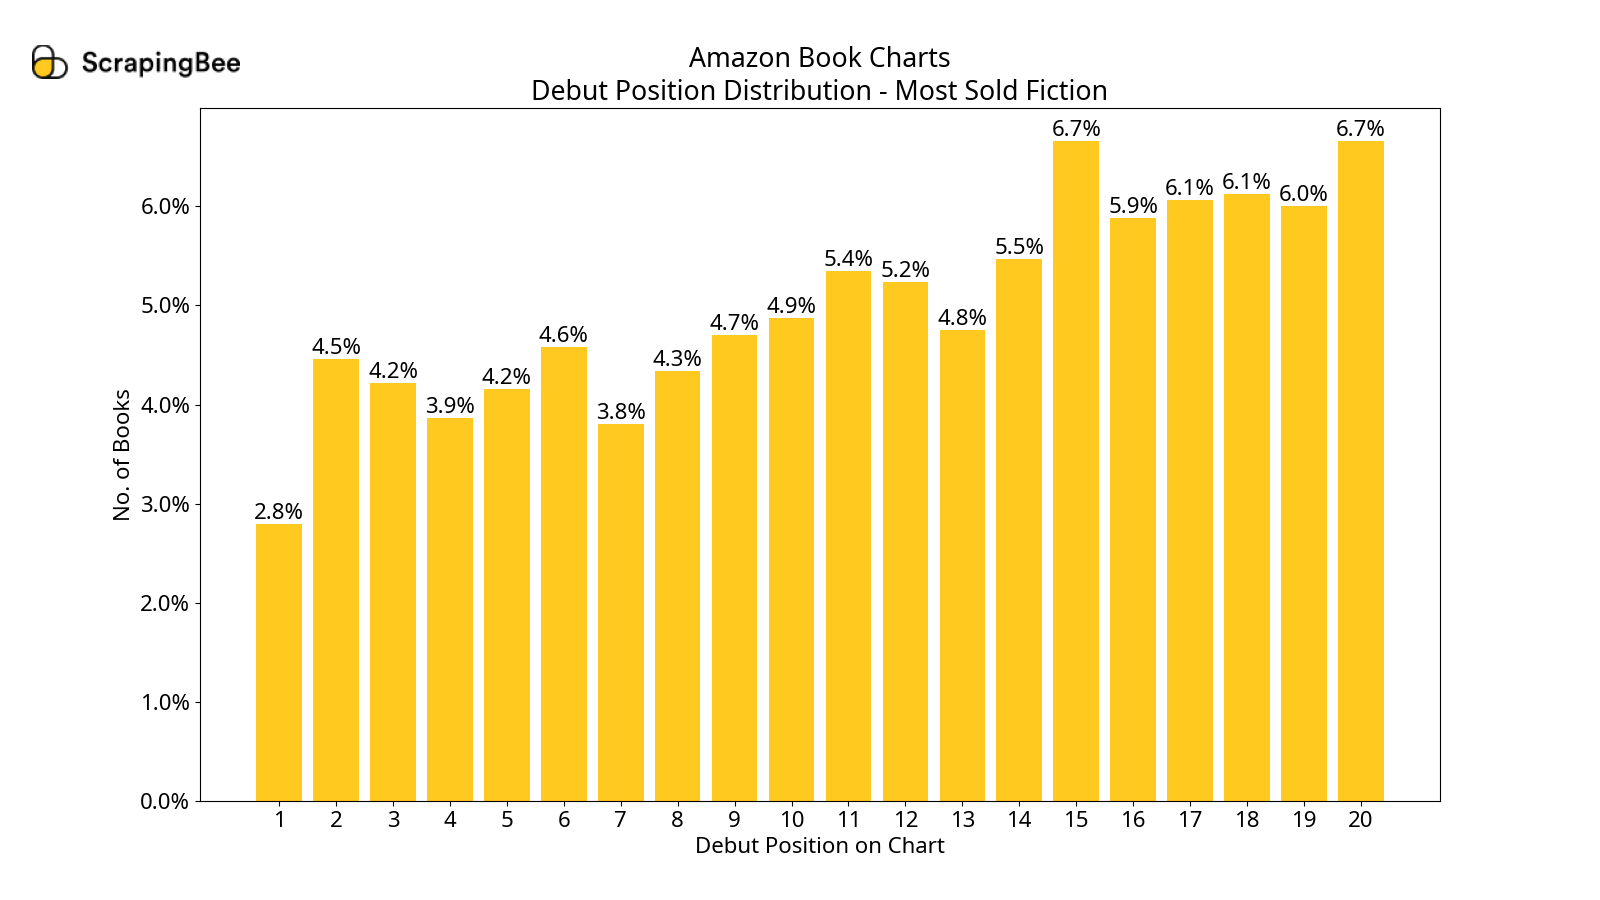 Debut Position - Most Sold Fiction